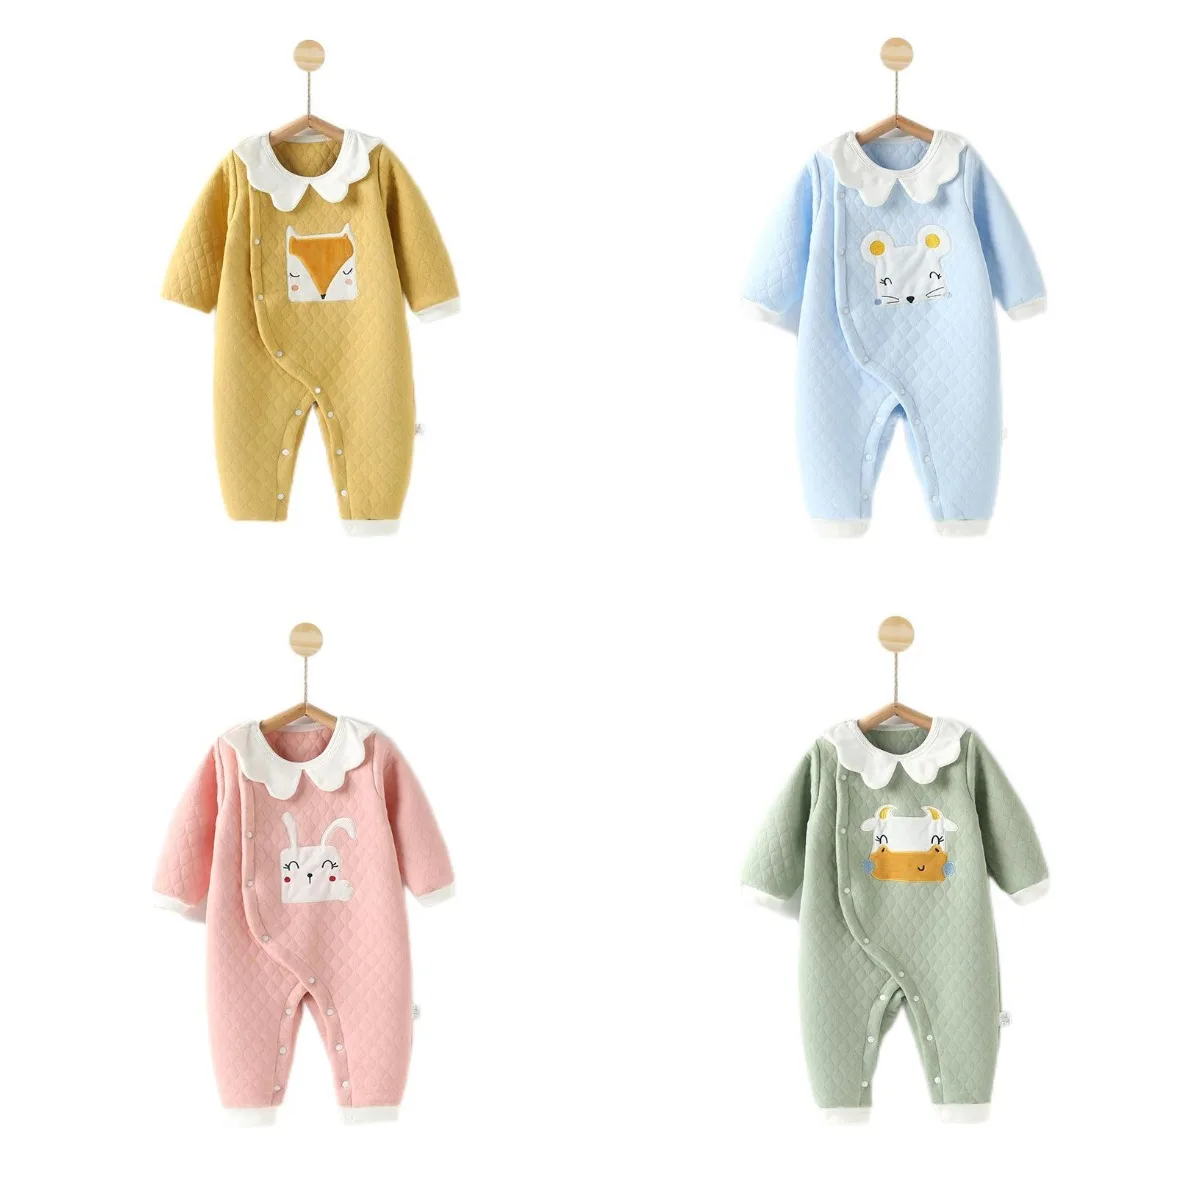 

Baby quilted one-piece spring autumn and winter oblique open pajamas newborn clothes warm romper cotton baby romper, Picture shows